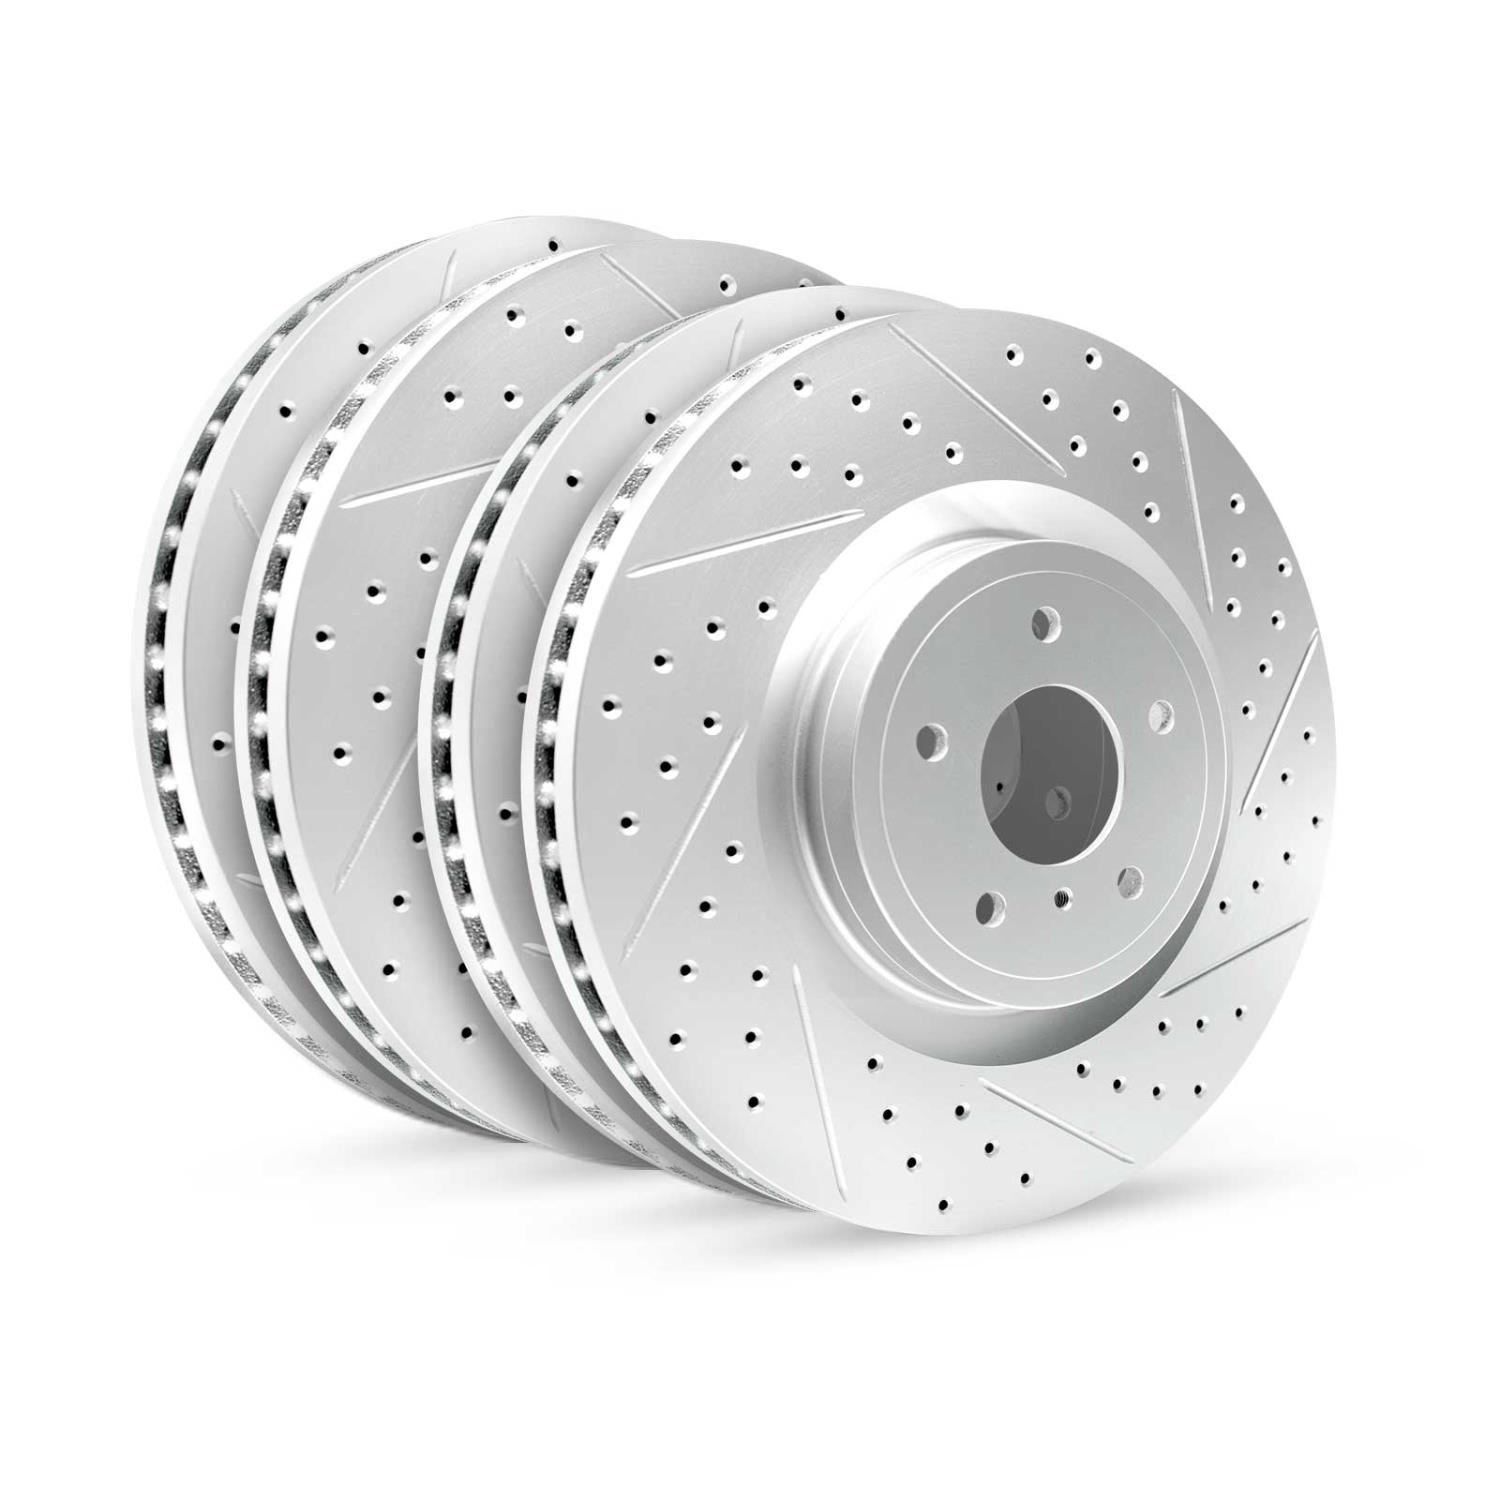 GEO-Carbon Drilled/Slotted Rotors, 2007-2012 Kia/Hyundai/Genesis, Position: Front/Rear